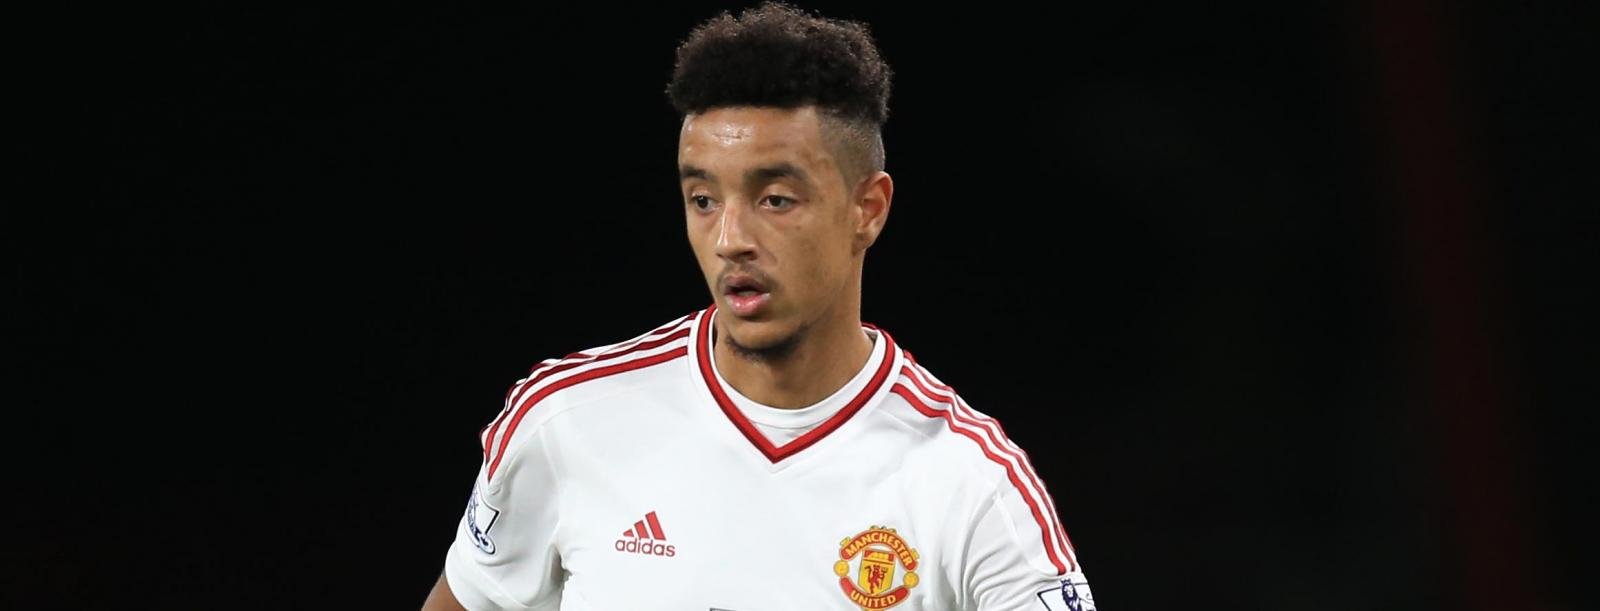 West Ham eye loan move for young Manchester United defender